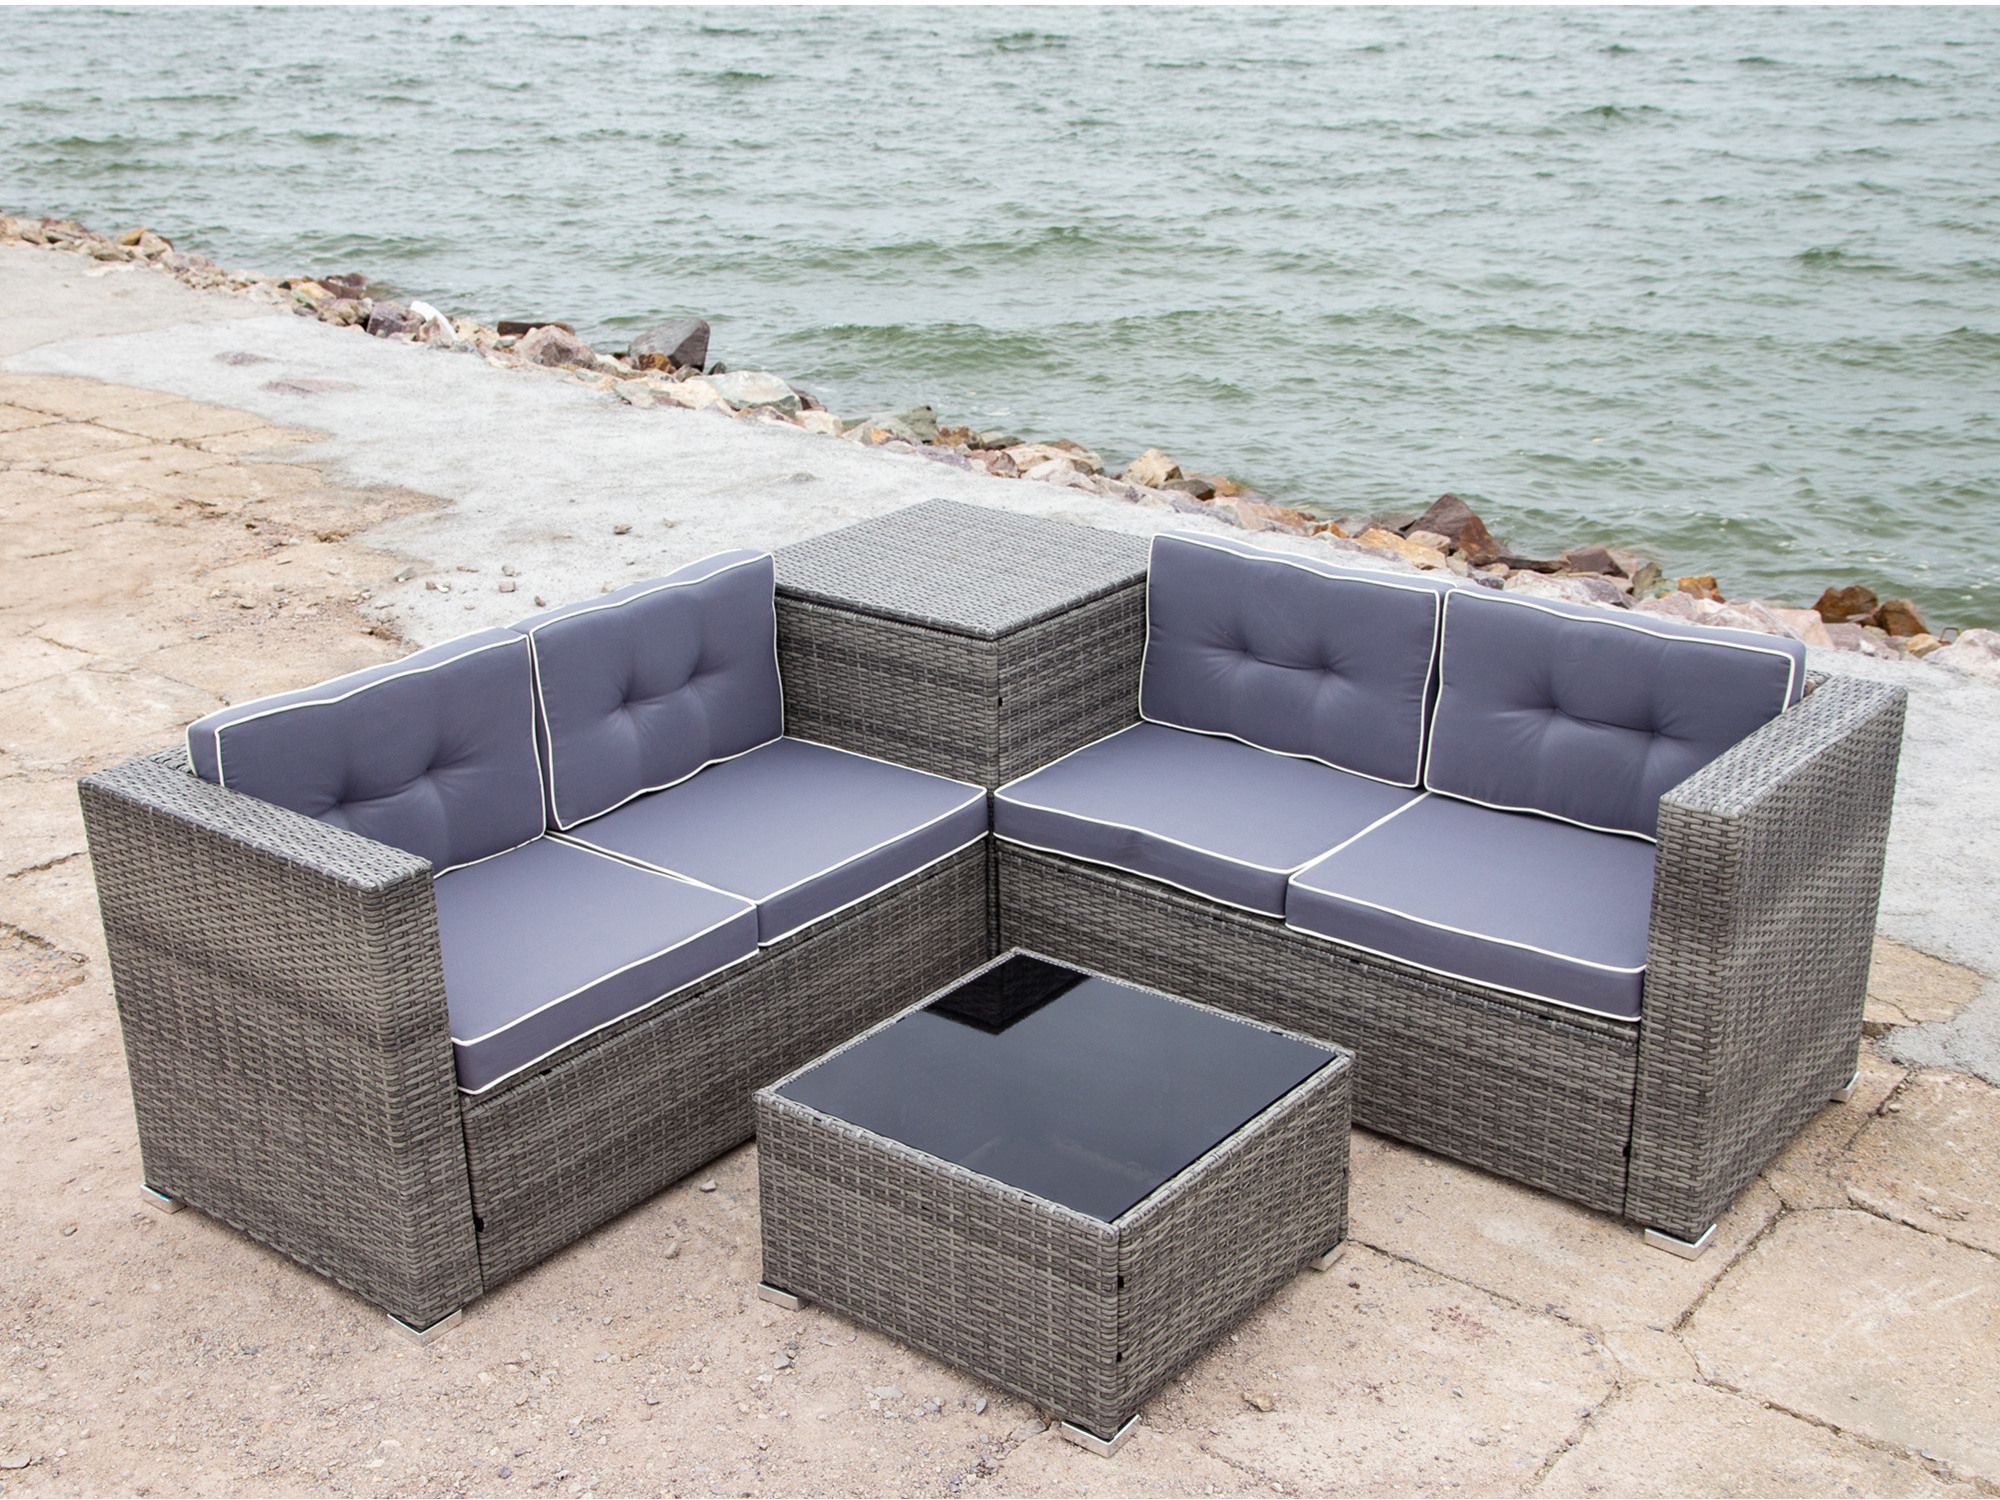 Most Popular Gray Wicker Patio Furniture Sets On For Backyard, 2020 Upgrade New 4 Inside 4 Piece Wicker Outdoor Seating Sets (View 7 of 15)